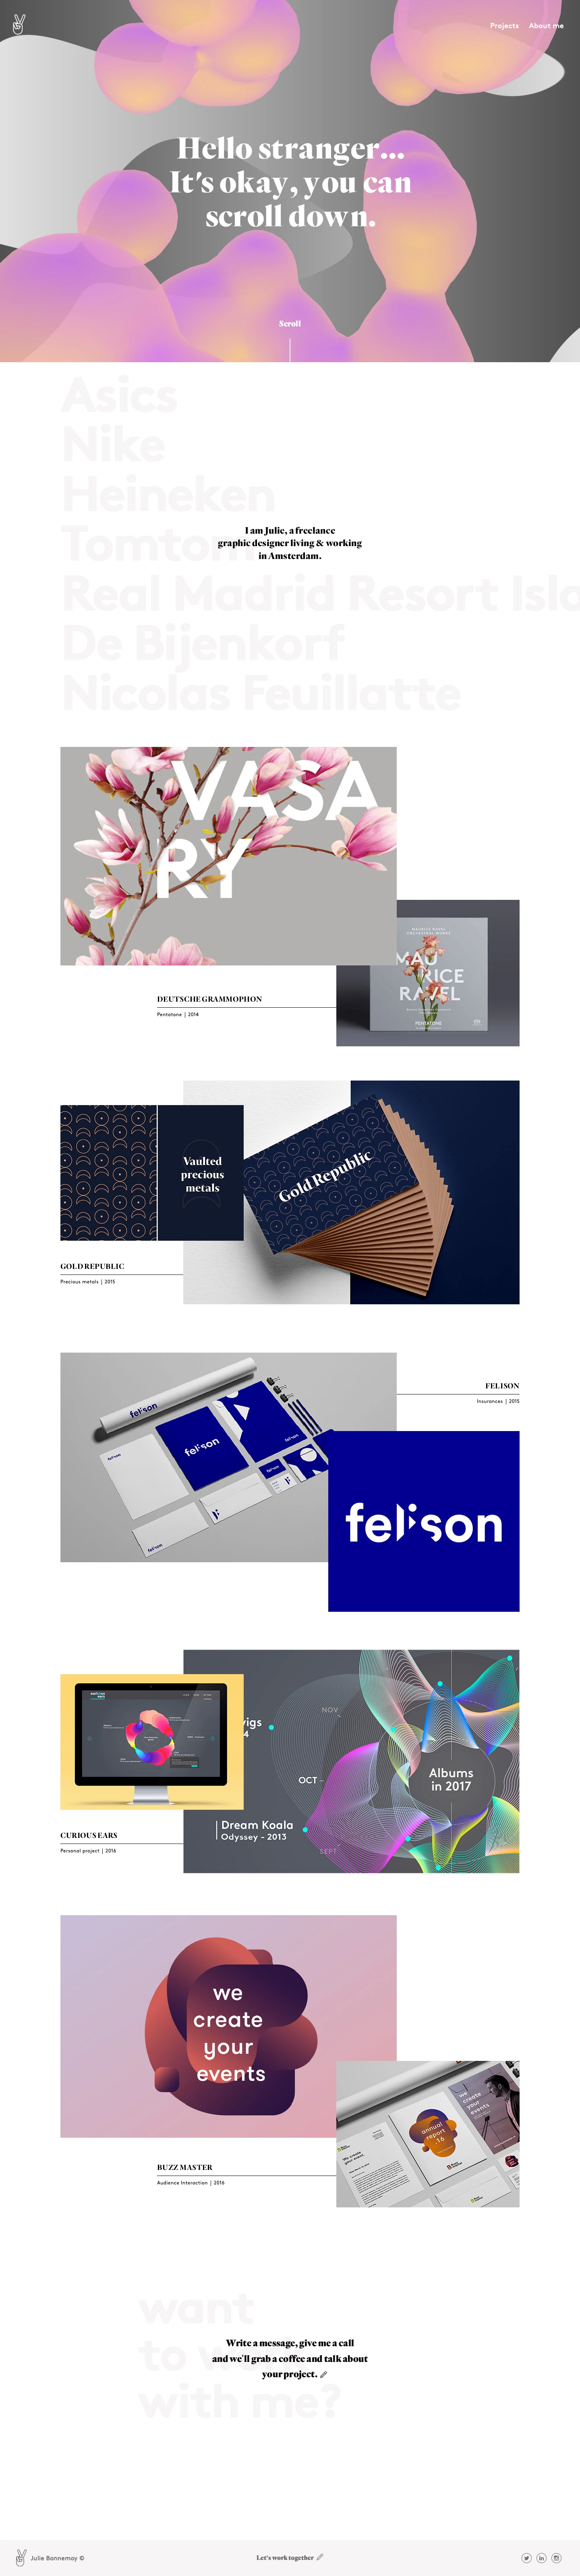 Julie Bonnemoy Landing Page Example: Amsterdam based art director specialized in branding, packaging, retail communication and web design.